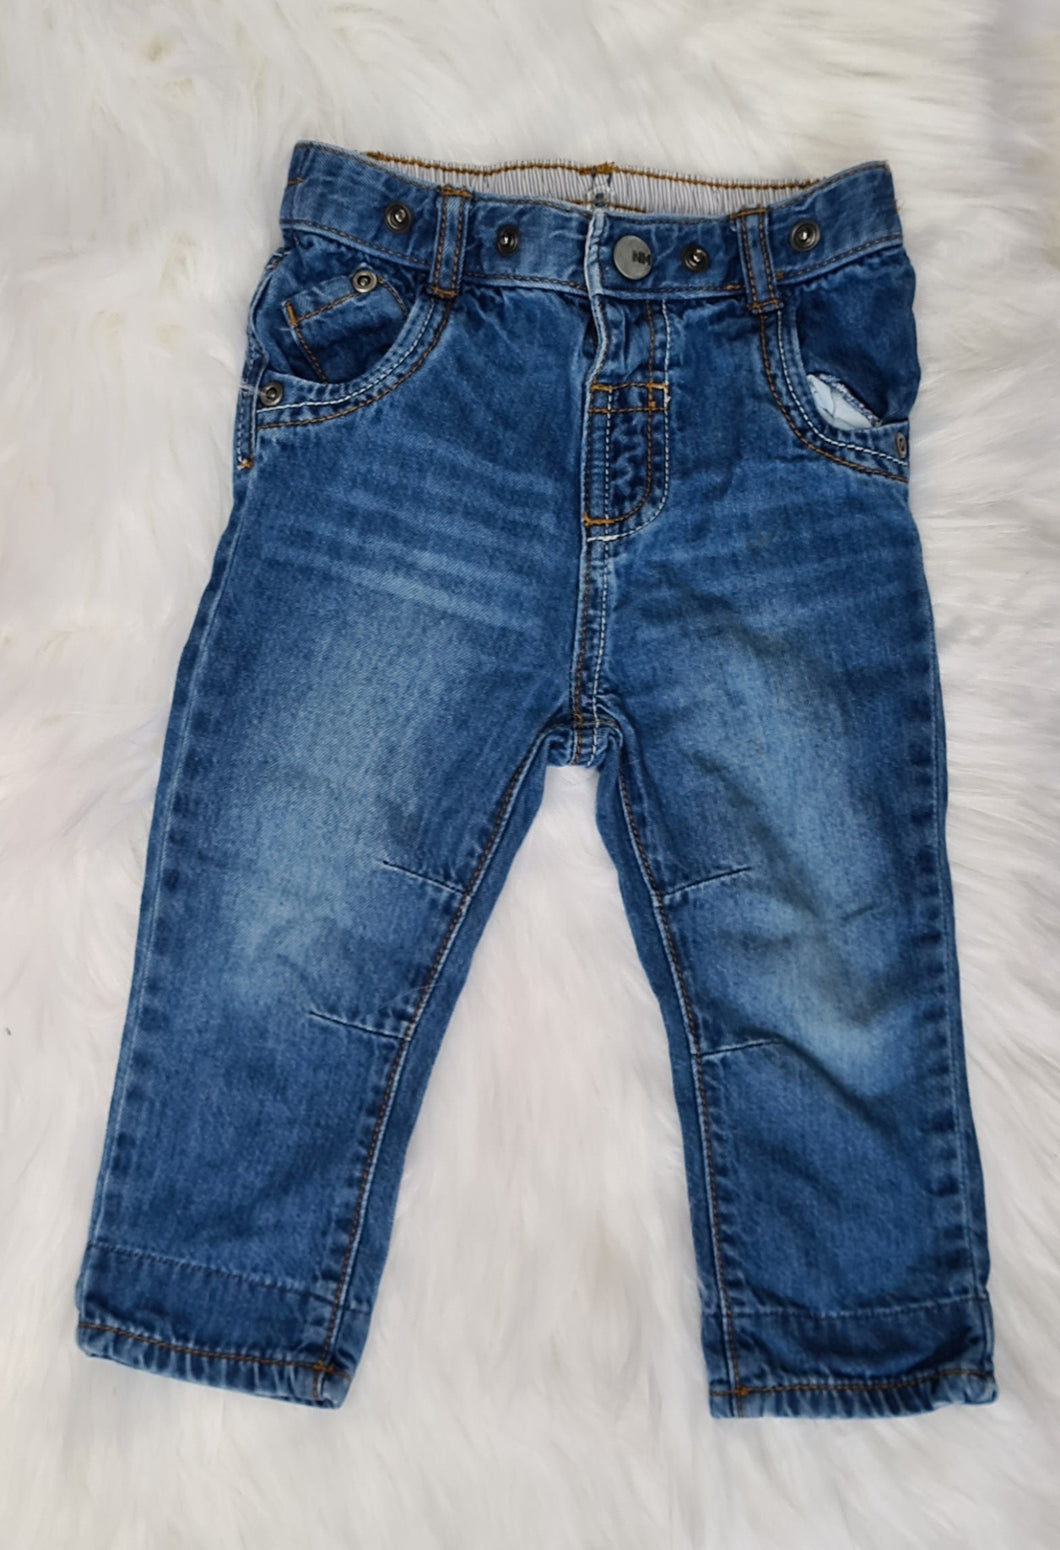 Boys 9-12 Months - Navy Jeans